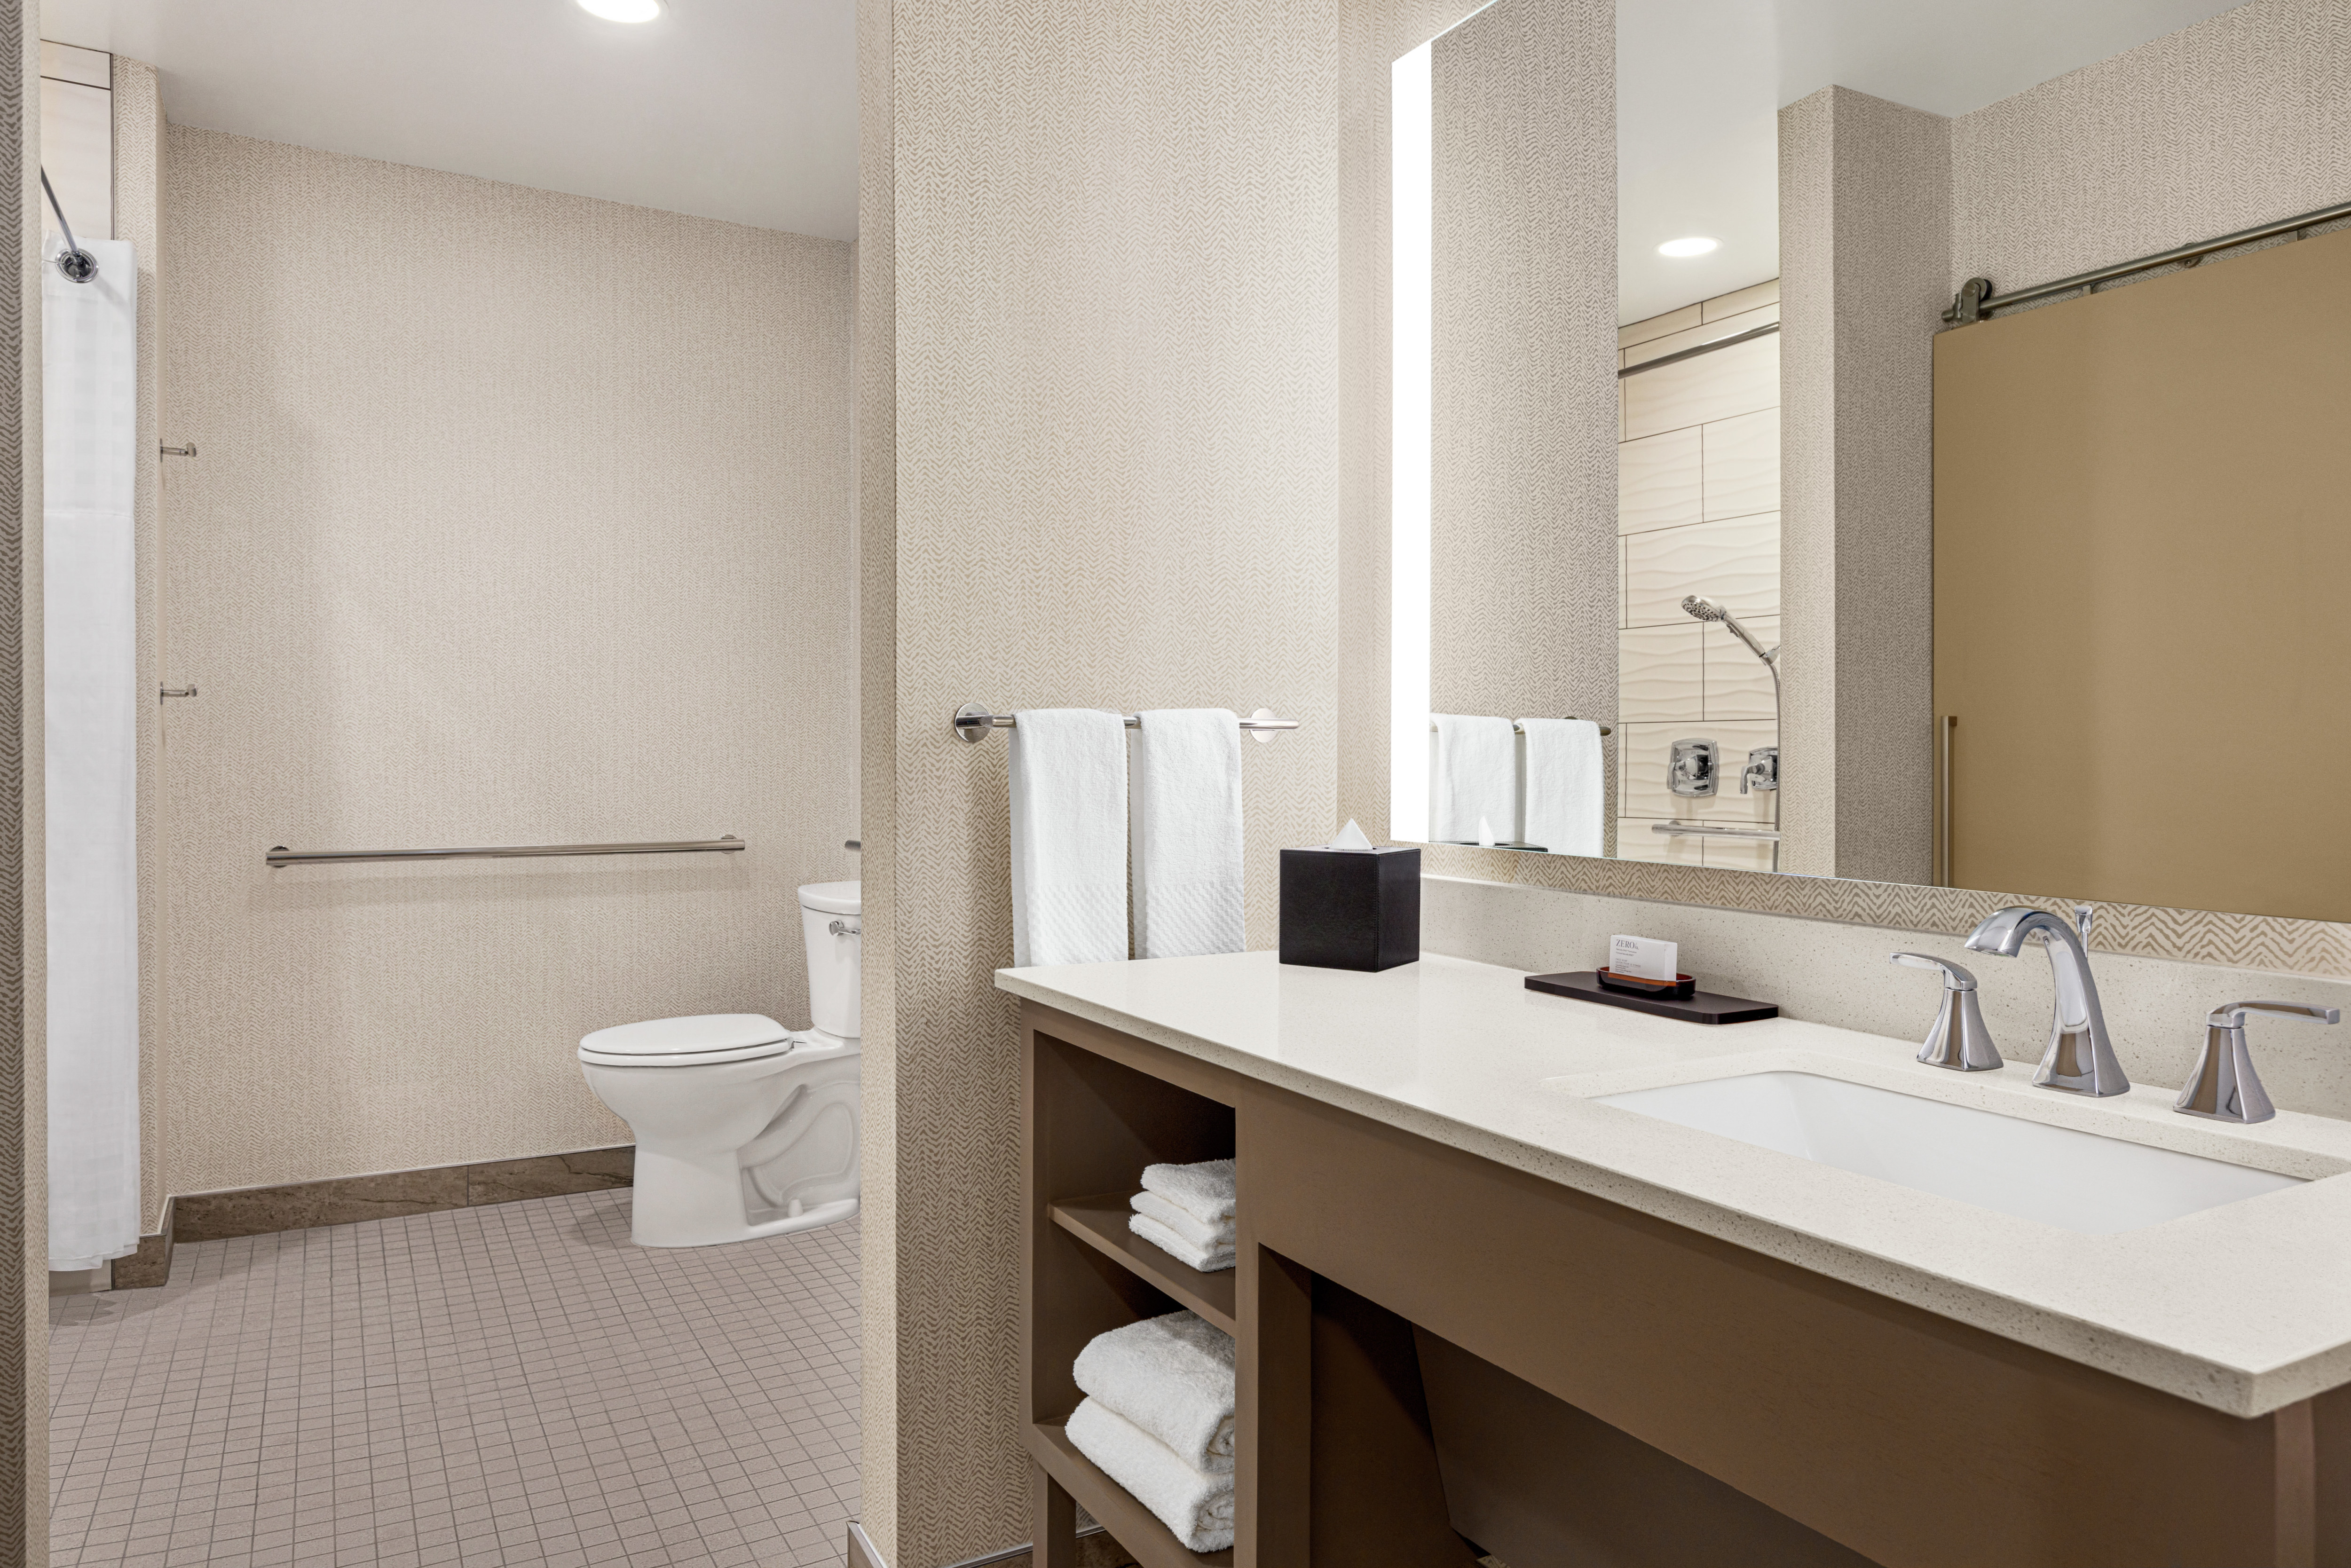 Spacious accessible bathroom featuring large vanity and convenient roll-in shower.